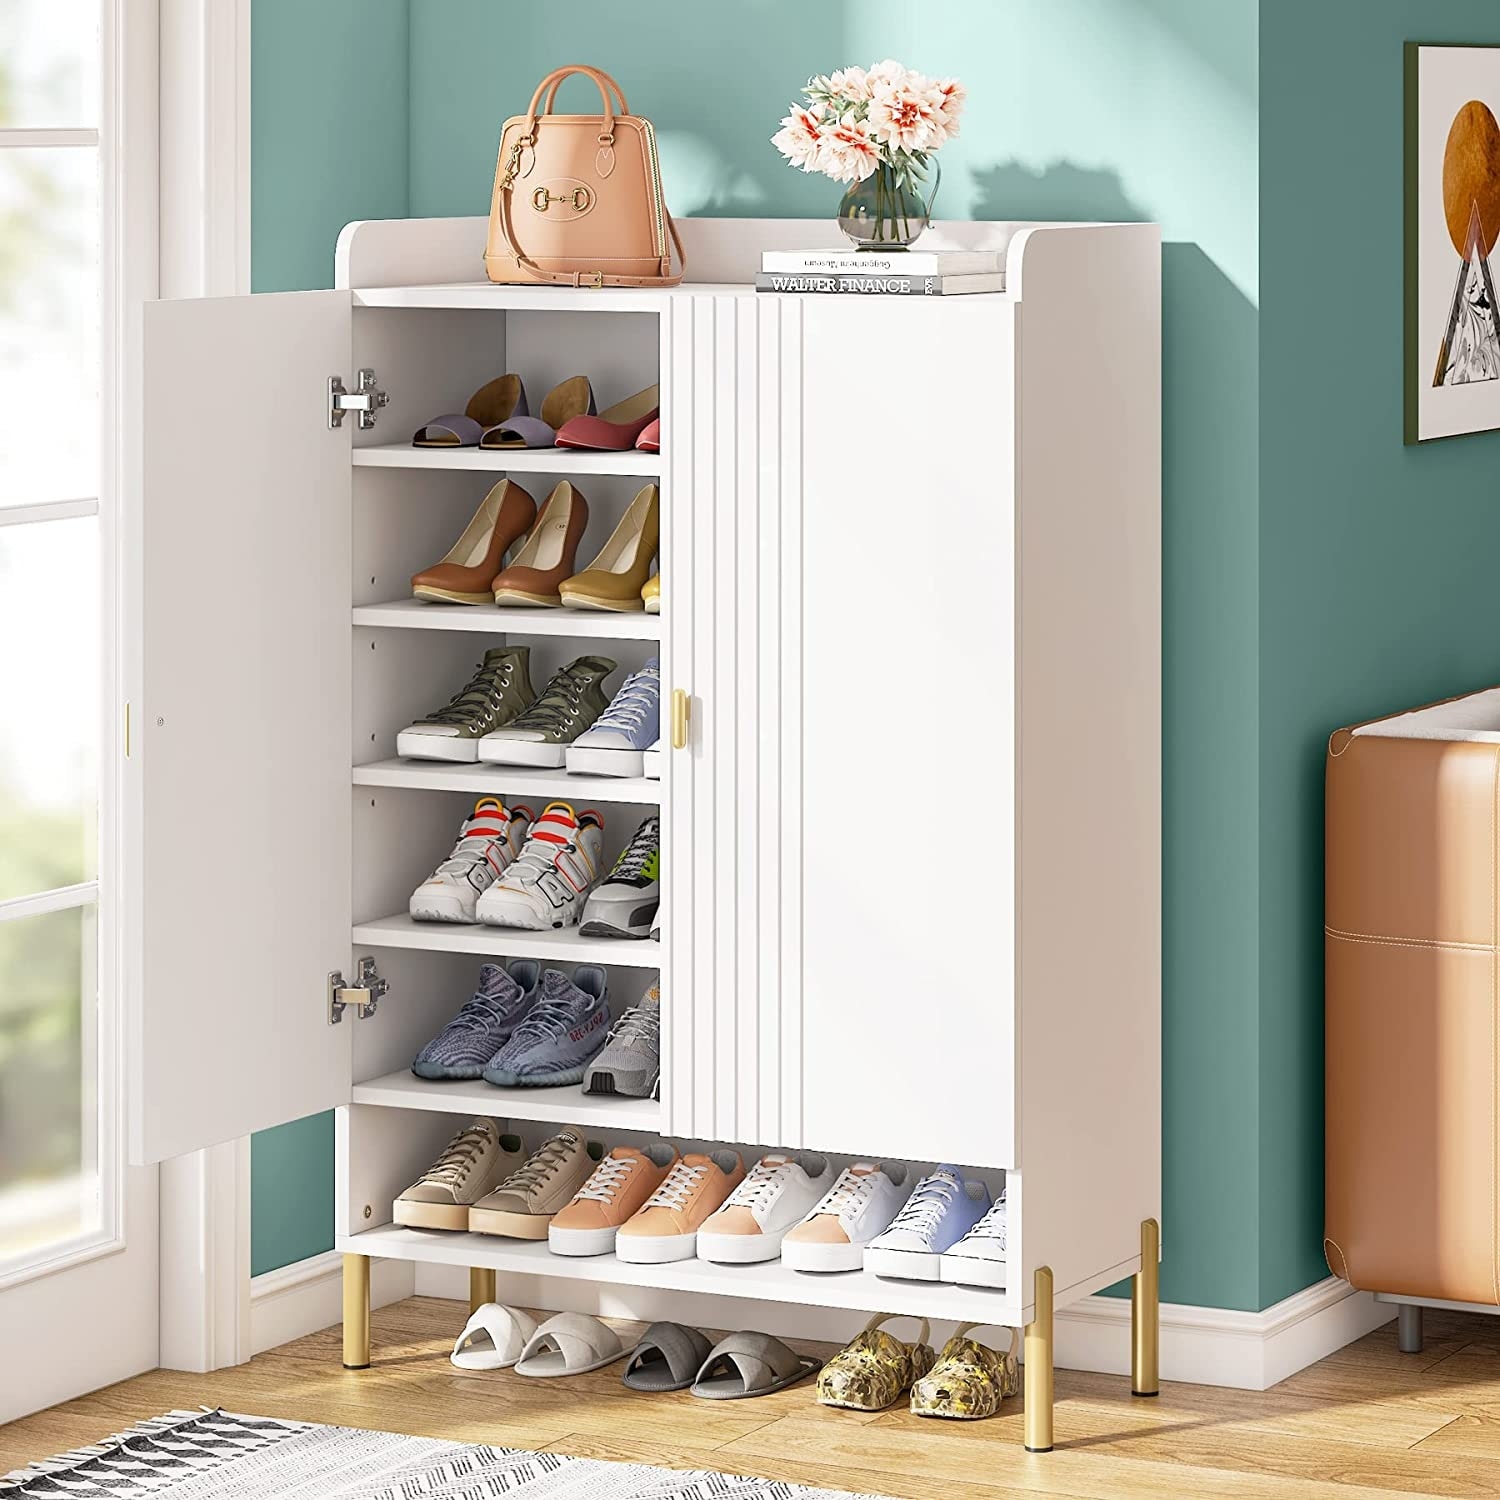 https://ak1.ostkcdn.com/images/products/is/images/direct/c16be94b0475e146965737f58ccb8d97ab4adef5/Slim-6-Tier-Shoe-Cabinet-Storage-for-Entryway%2C-Hallway%2C-Living-Room.jpg